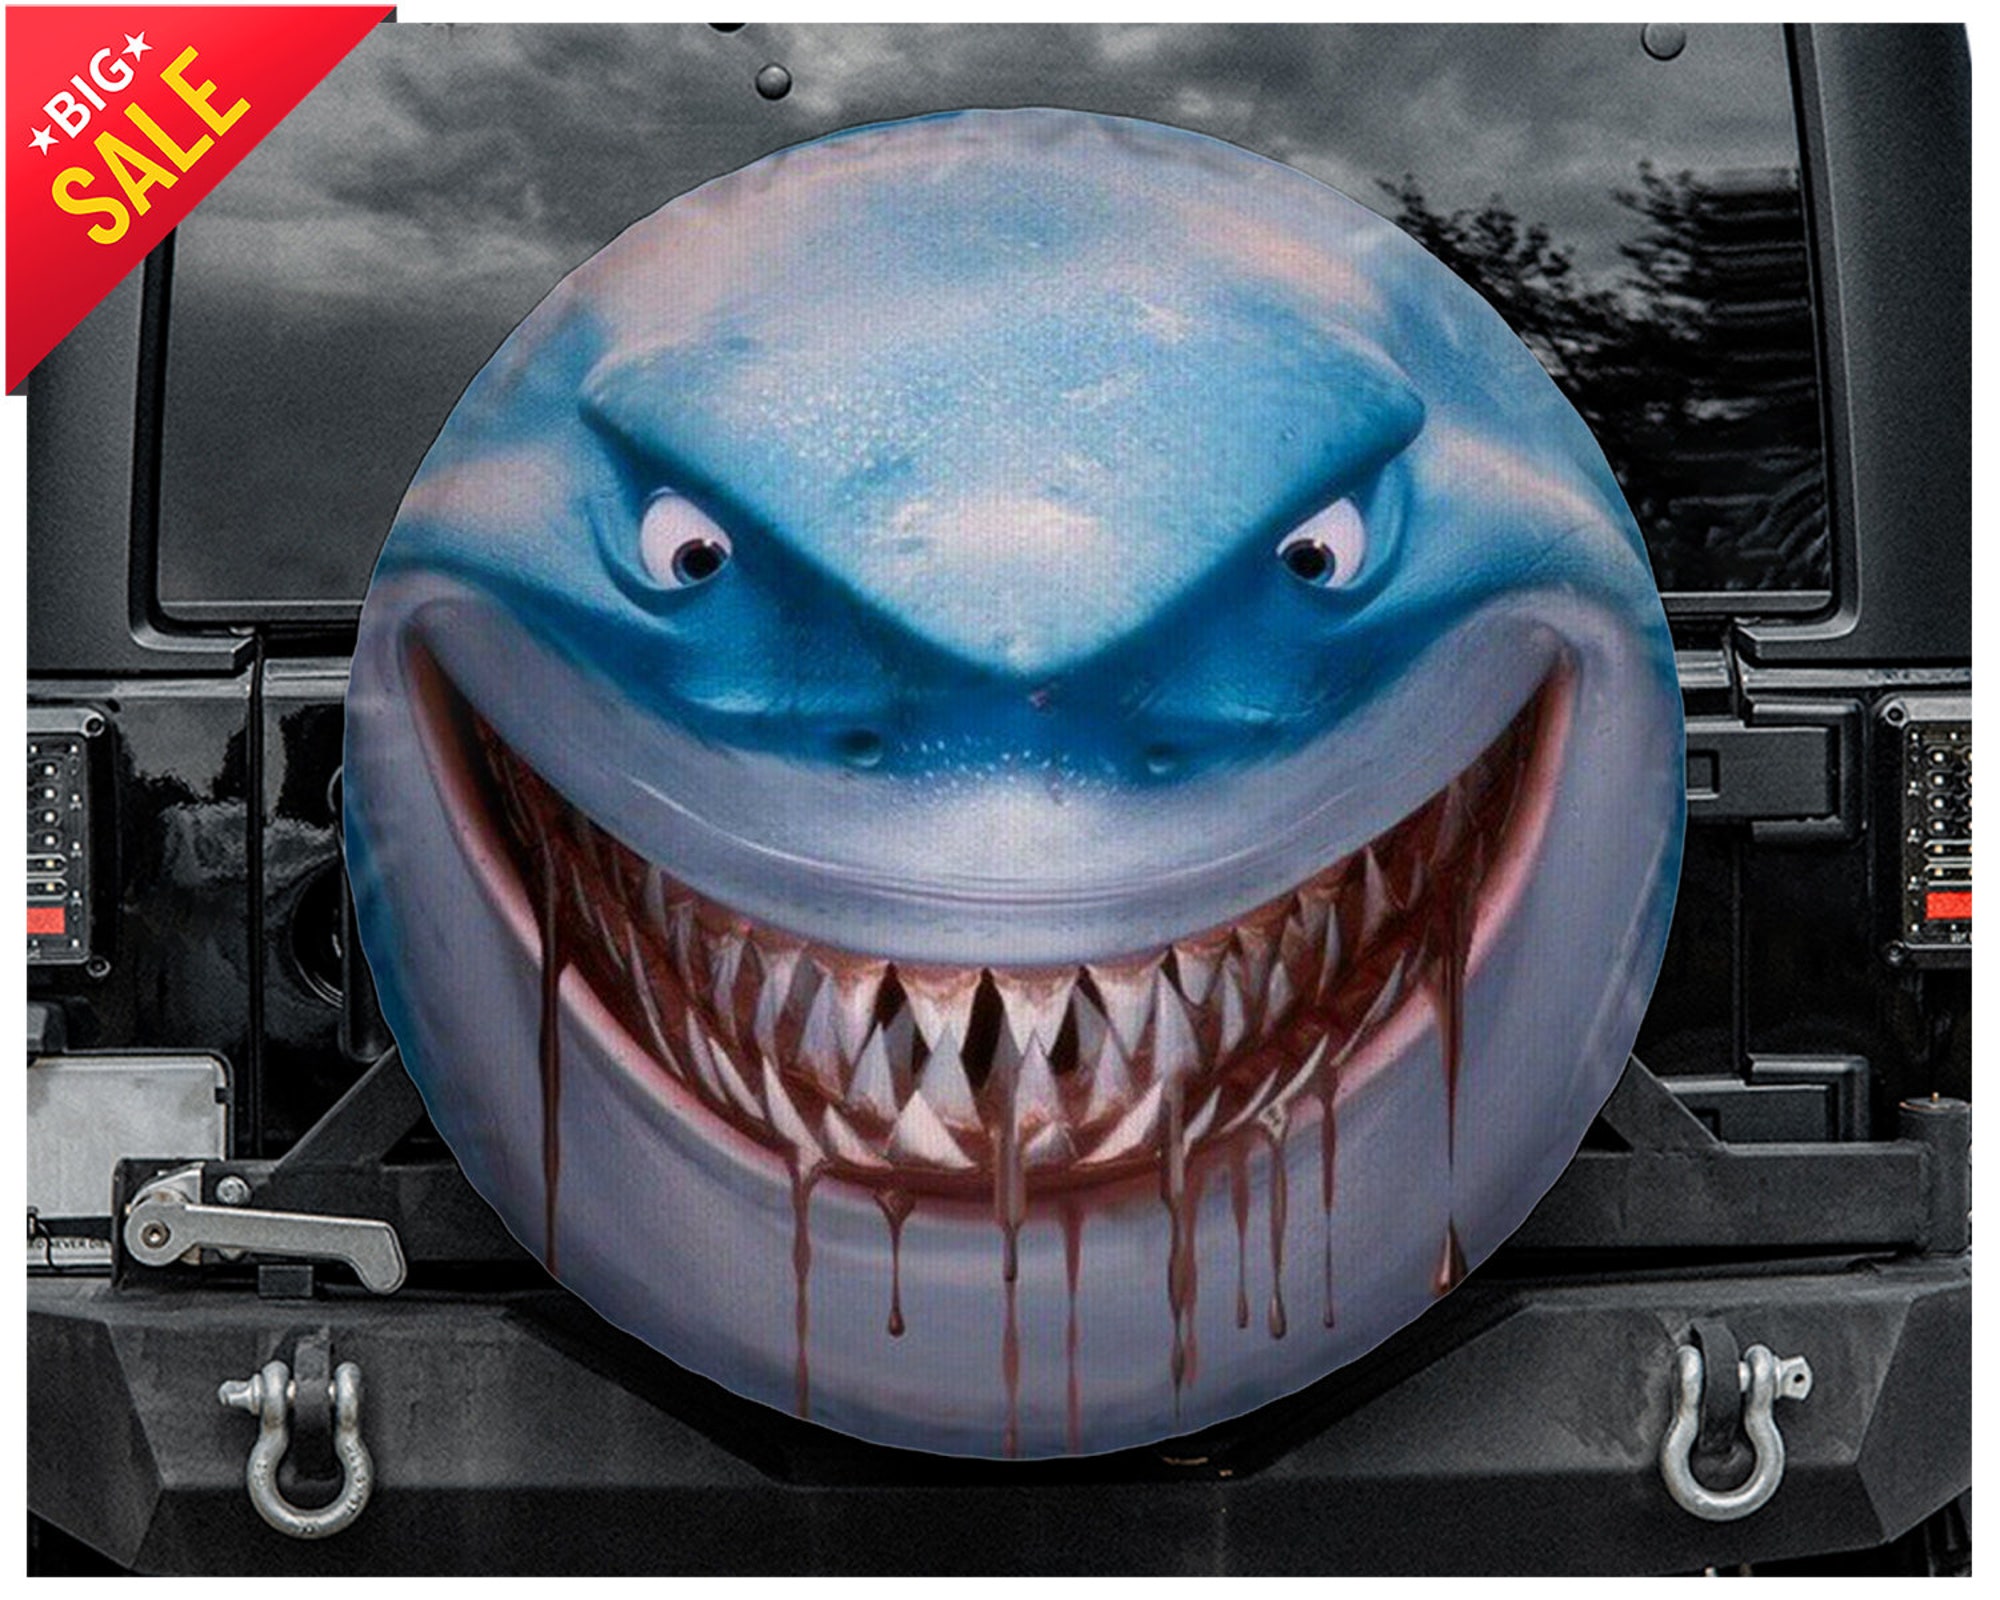 Shark, Hippie Shark, Shark Spare Tire Cover, Funny gifts, Halloween gifts